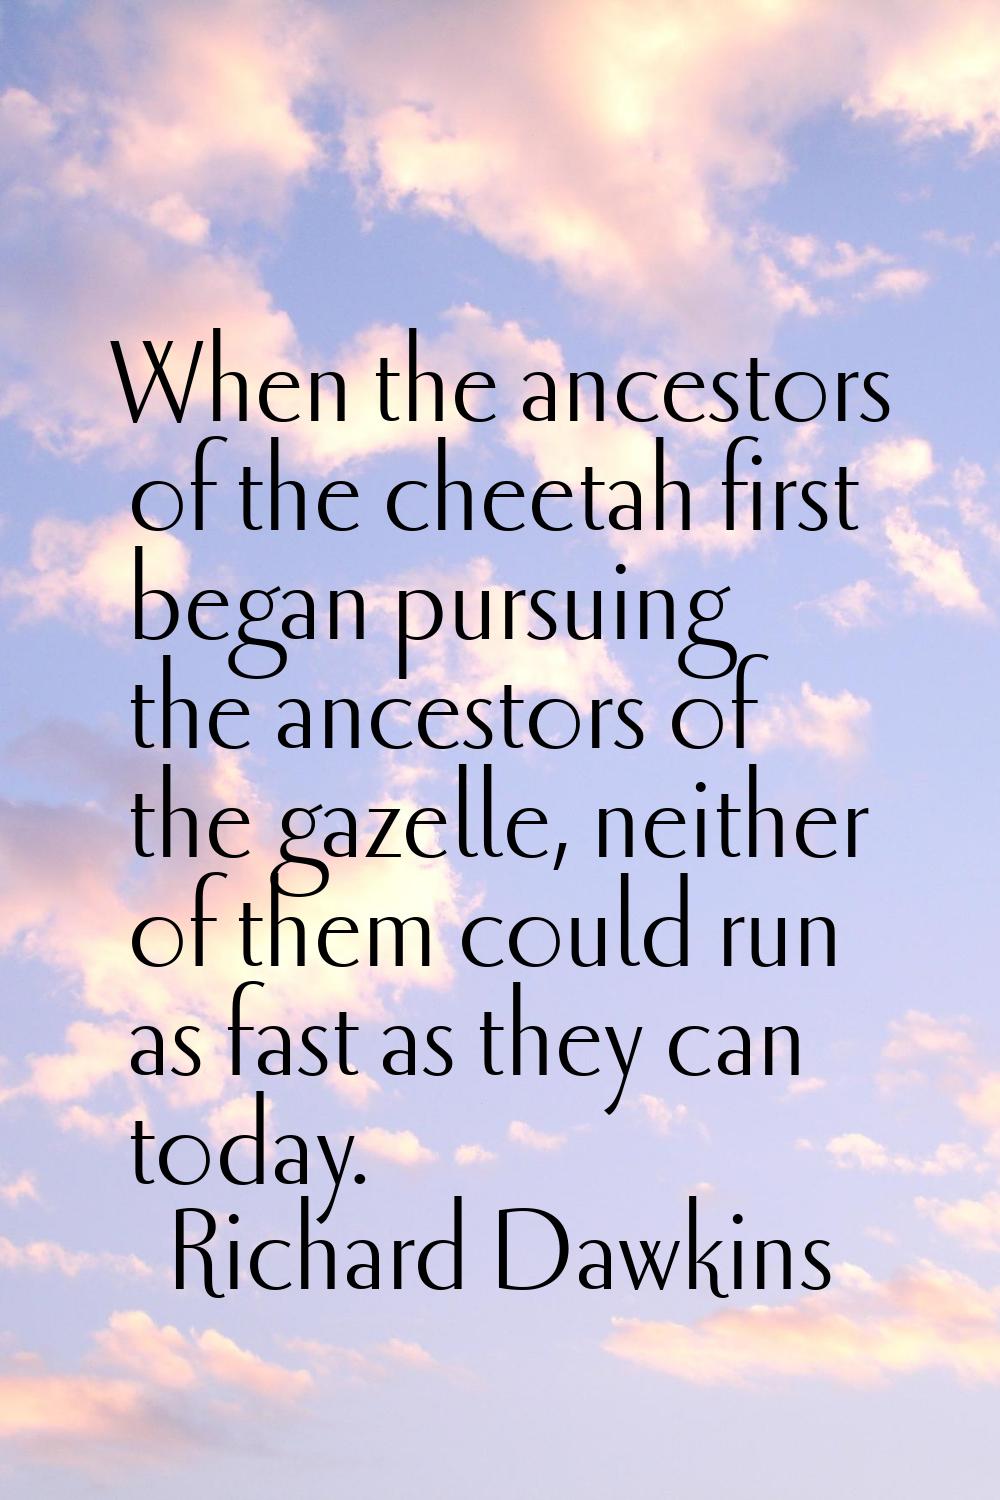 When the ancestors of the cheetah first began pursuing the ancestors of the gazelle, neither of the